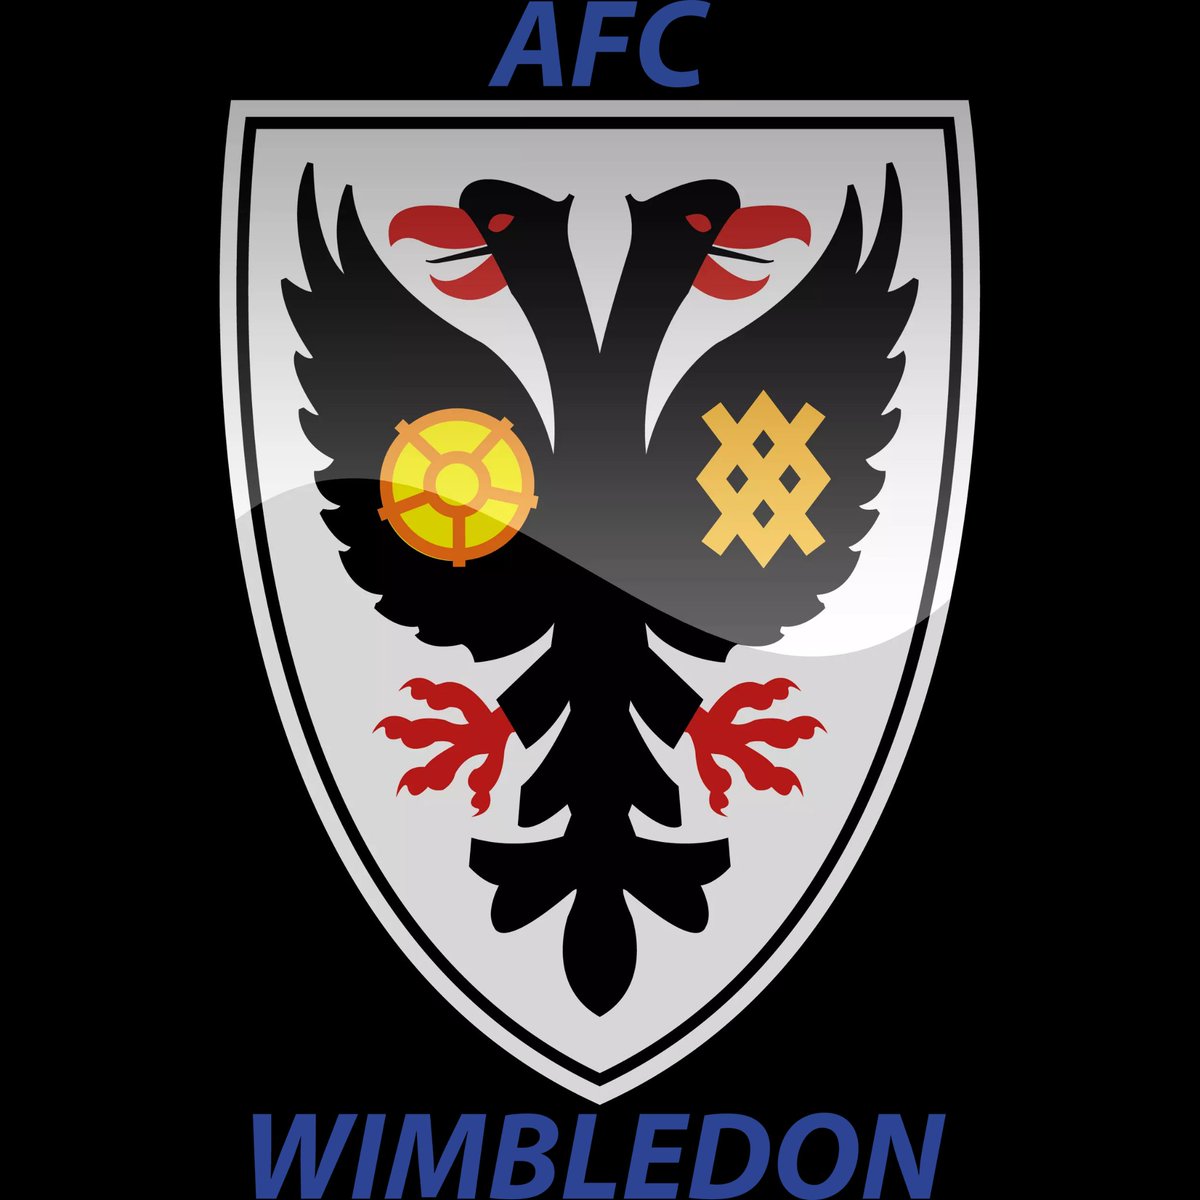 13) AFC Wimbledon Points: 180 Manager: Alan Pardew The crazy gang are back! With Alan Pardew at the helm and Declan Rice in midfield this feels like a very weird version of West Ham. But I guess West Ham are a very weird version of West Ham.